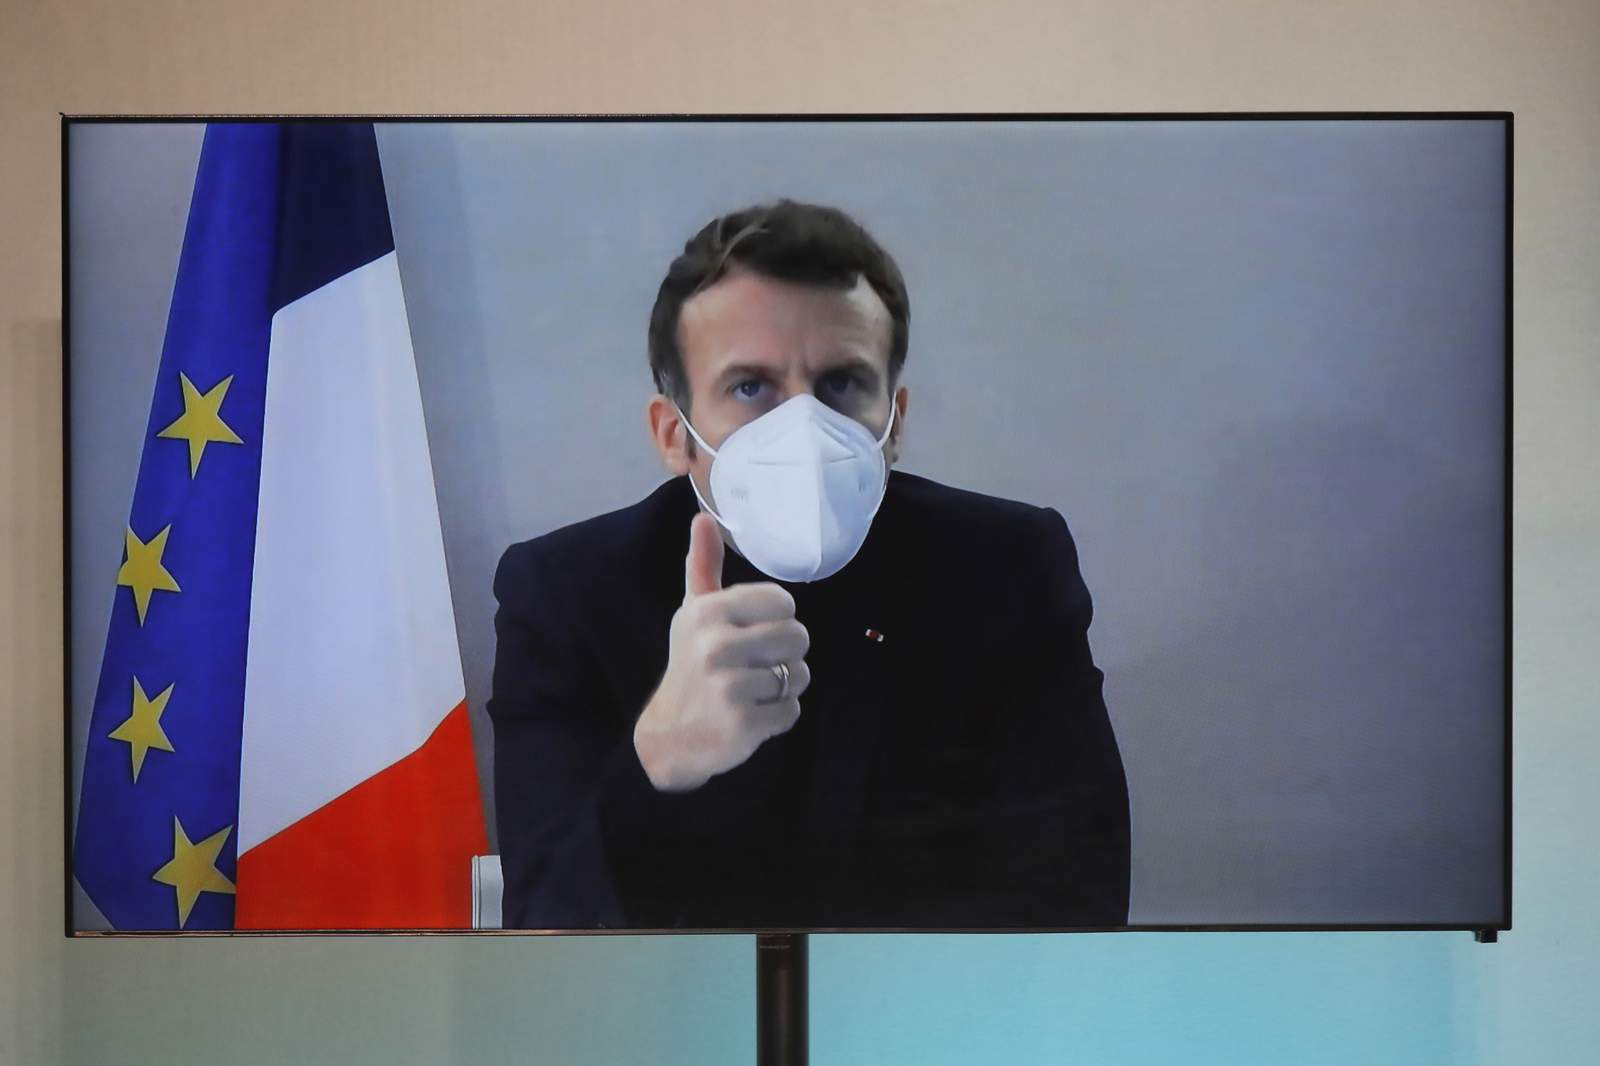 French President Emmanuel Macron tests positive for COVID-19